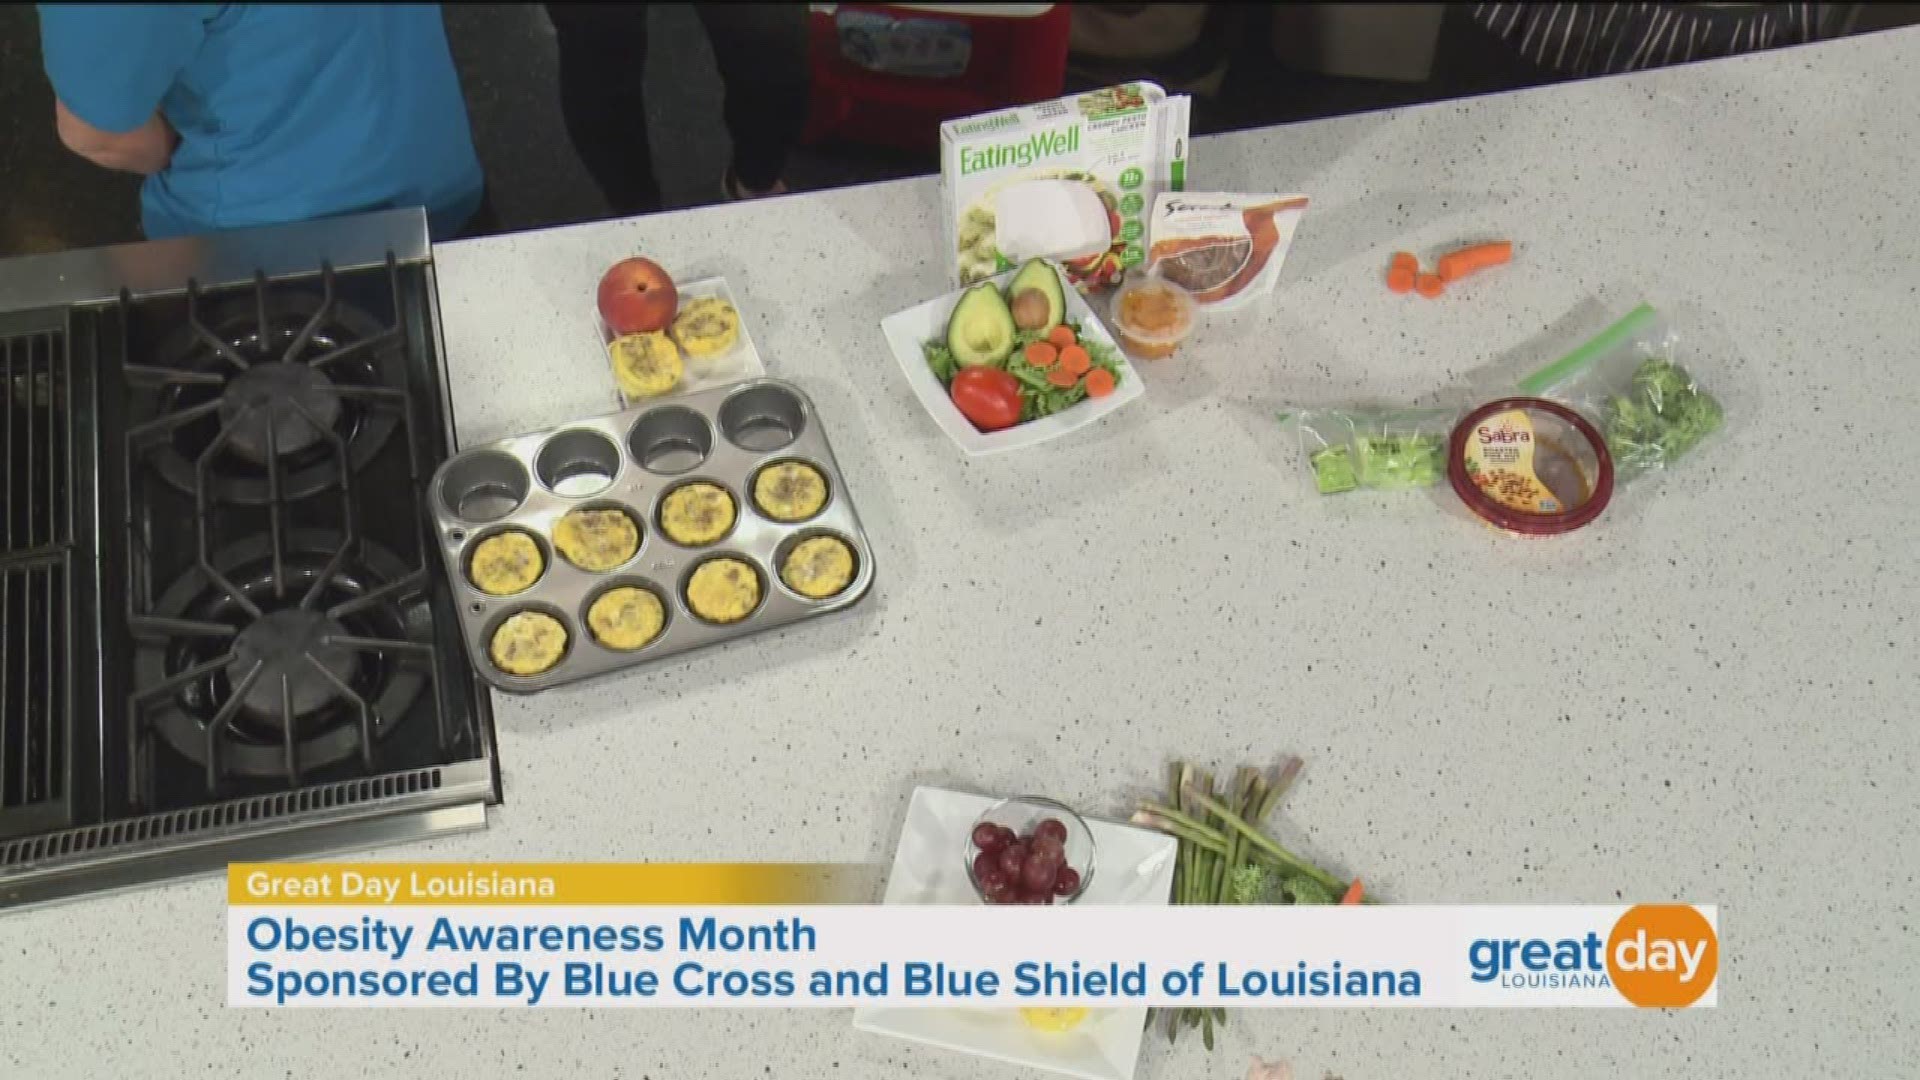 September is Obesity Awareness Month. Blue Cross and Blue Shield of Louisiana dietitians Katherine and Laura share easy ideas for healthy meals and snacks.